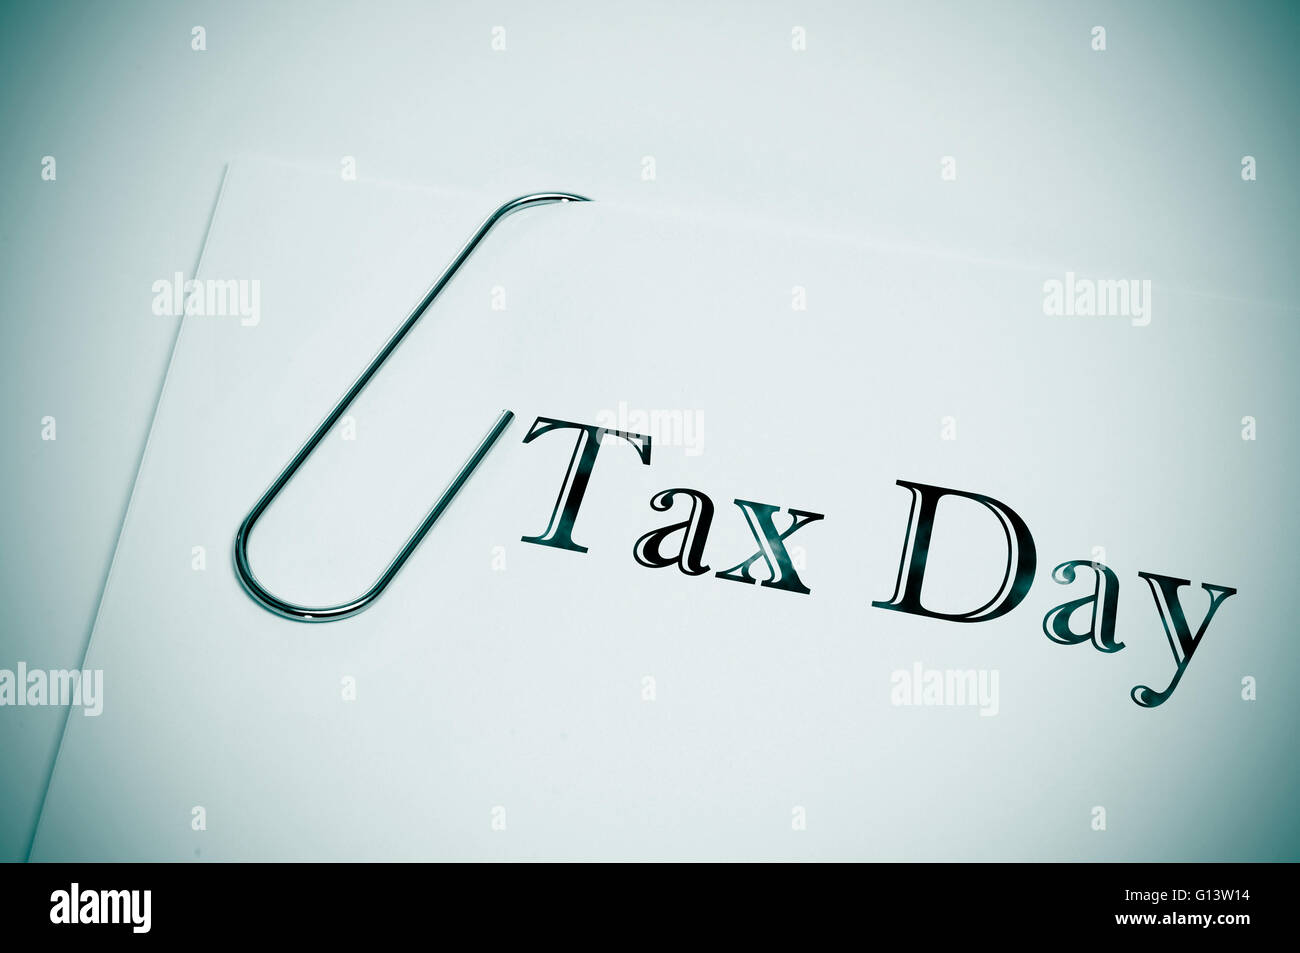 sentence tax day written in the cover of a dossier Stock Photo